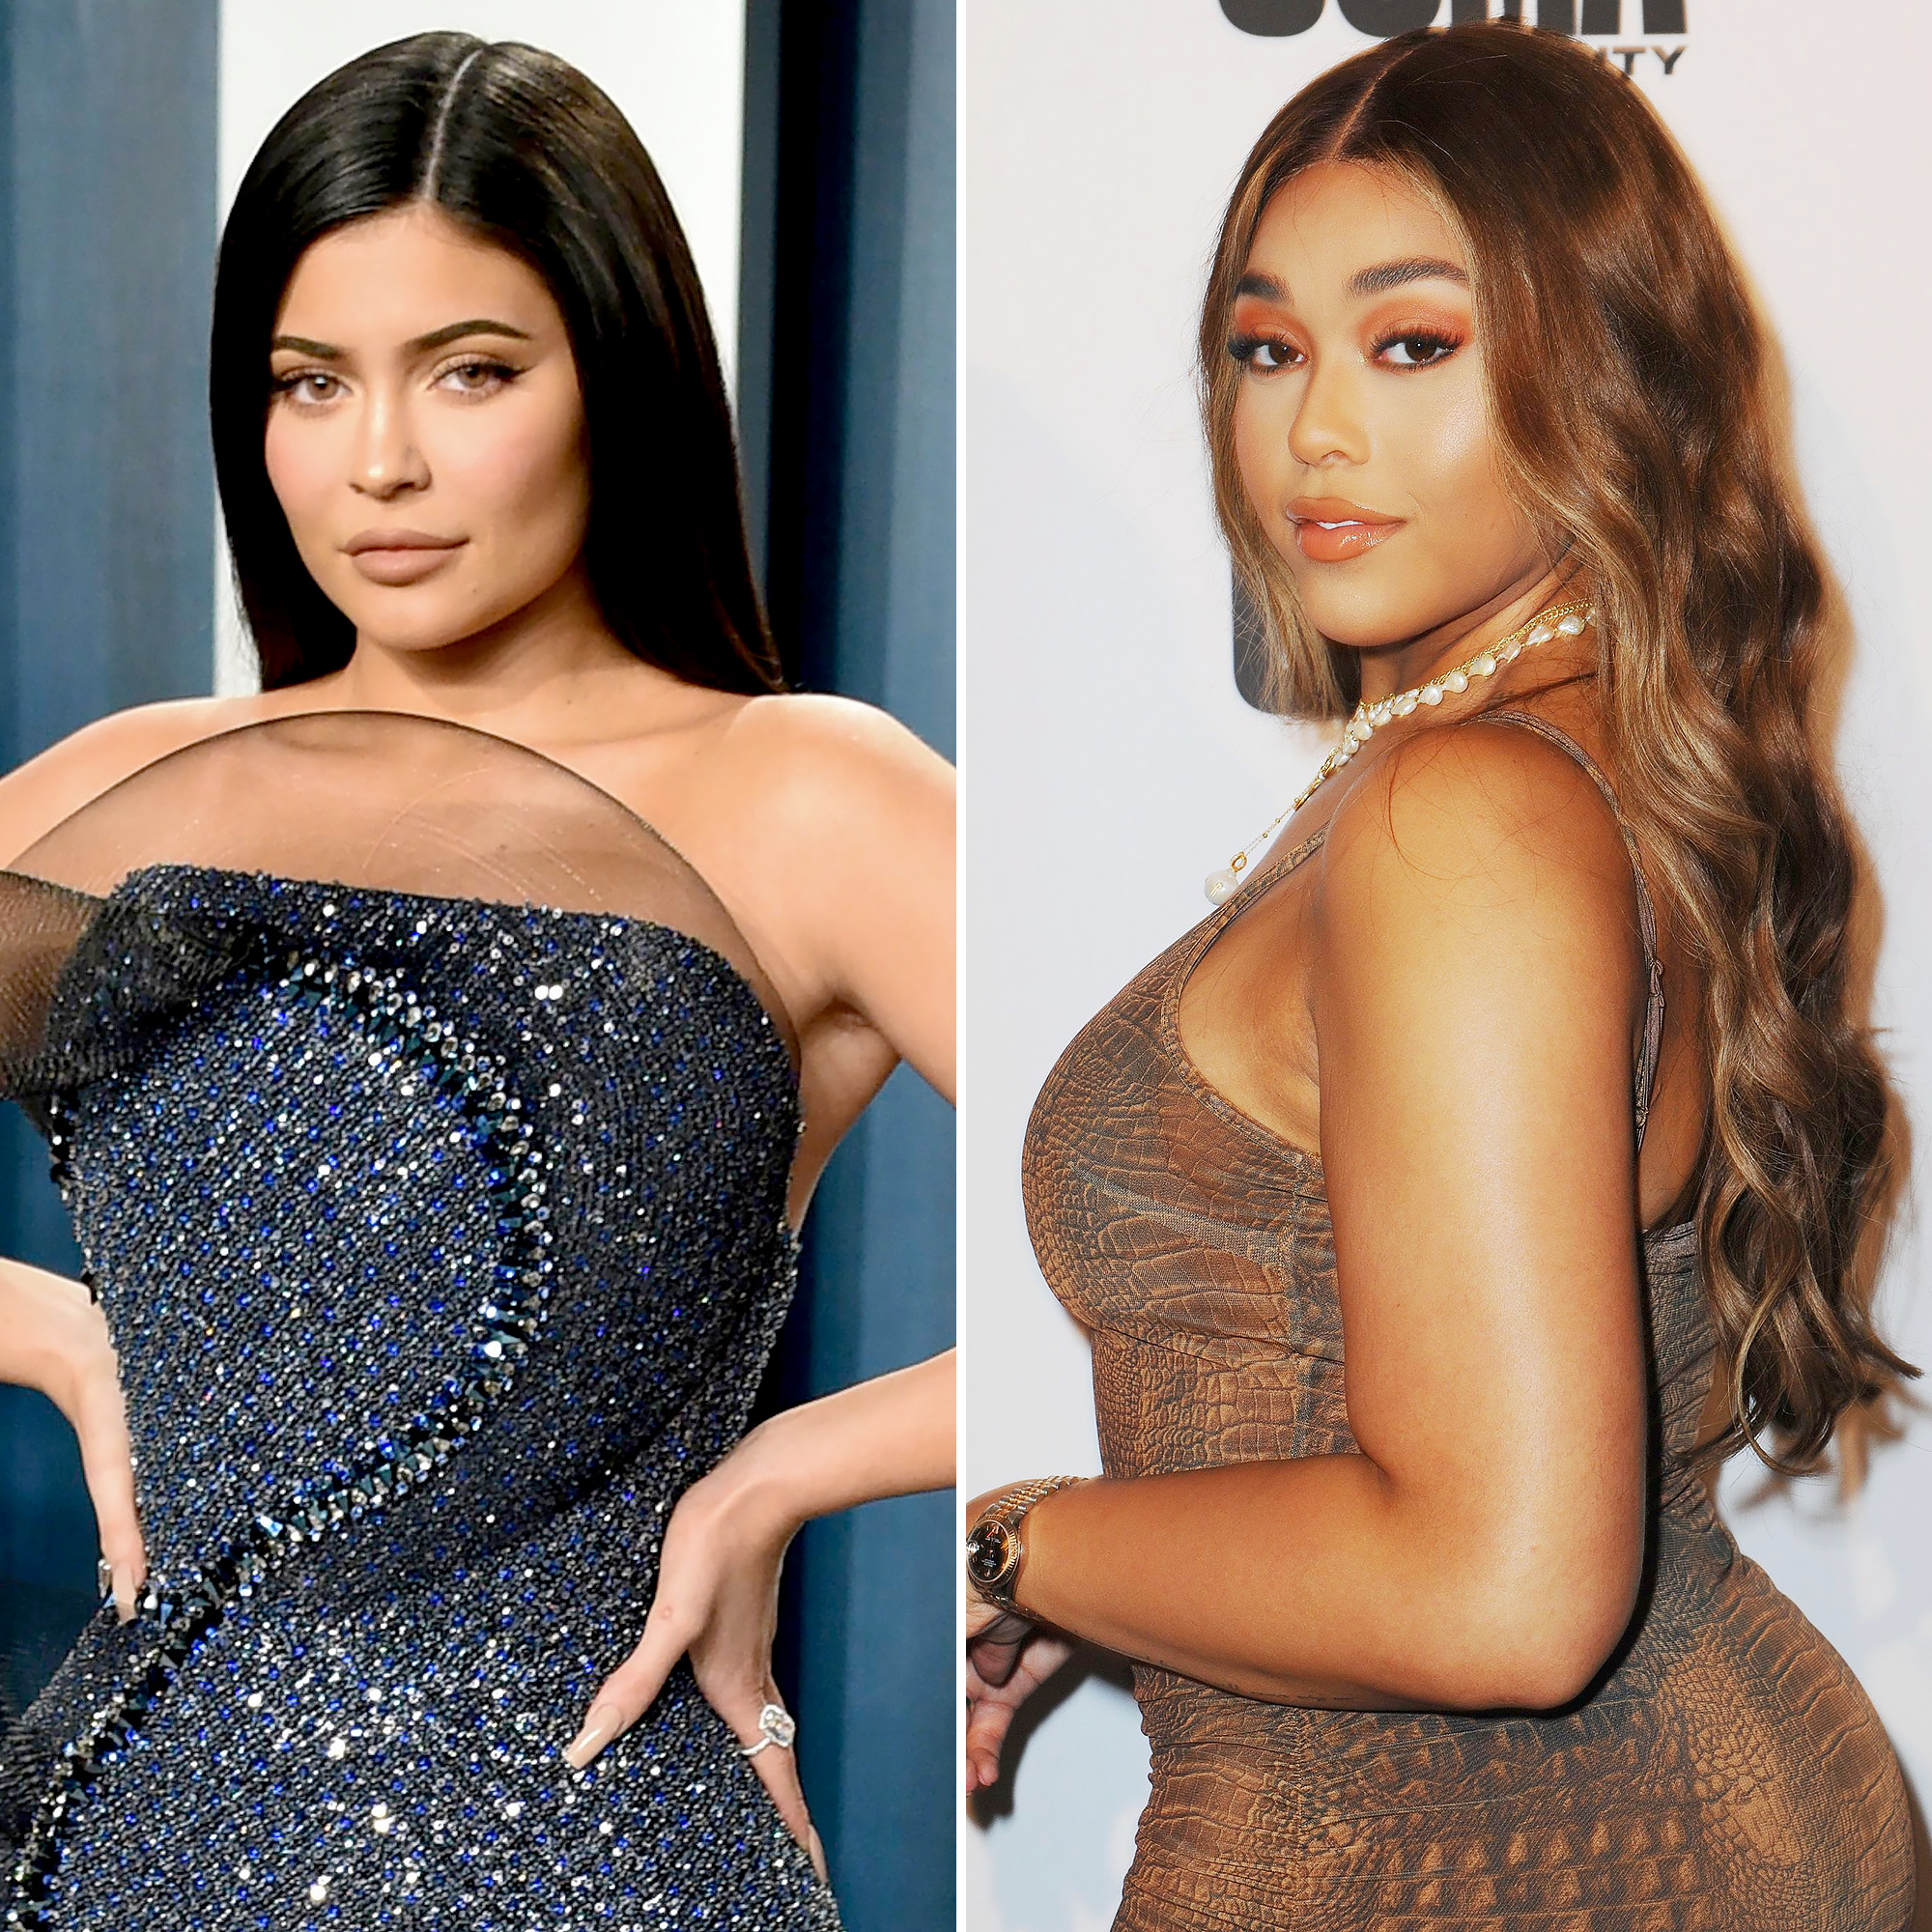 Kylie Jenner and Jordyn Woods Get Pulled Over By Police